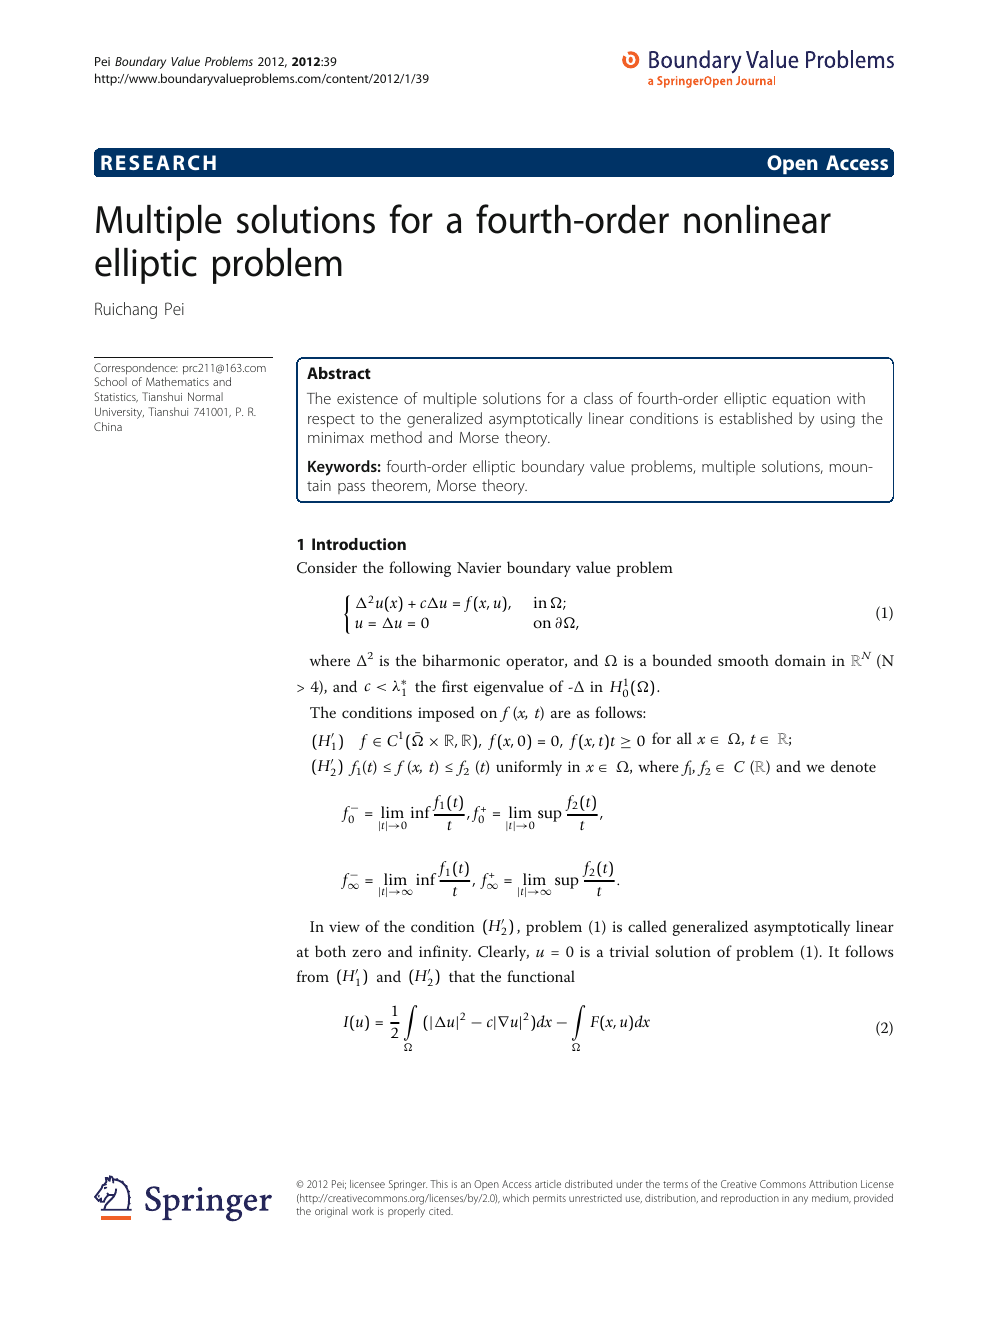 Multiple Solutions For A Fourth Order Nonlinear Elliptic Problem Topic Of Research Paper In Mathematics Download Scholarly Article Pdf And Read For Free On Cyberleninka Open Science Hub